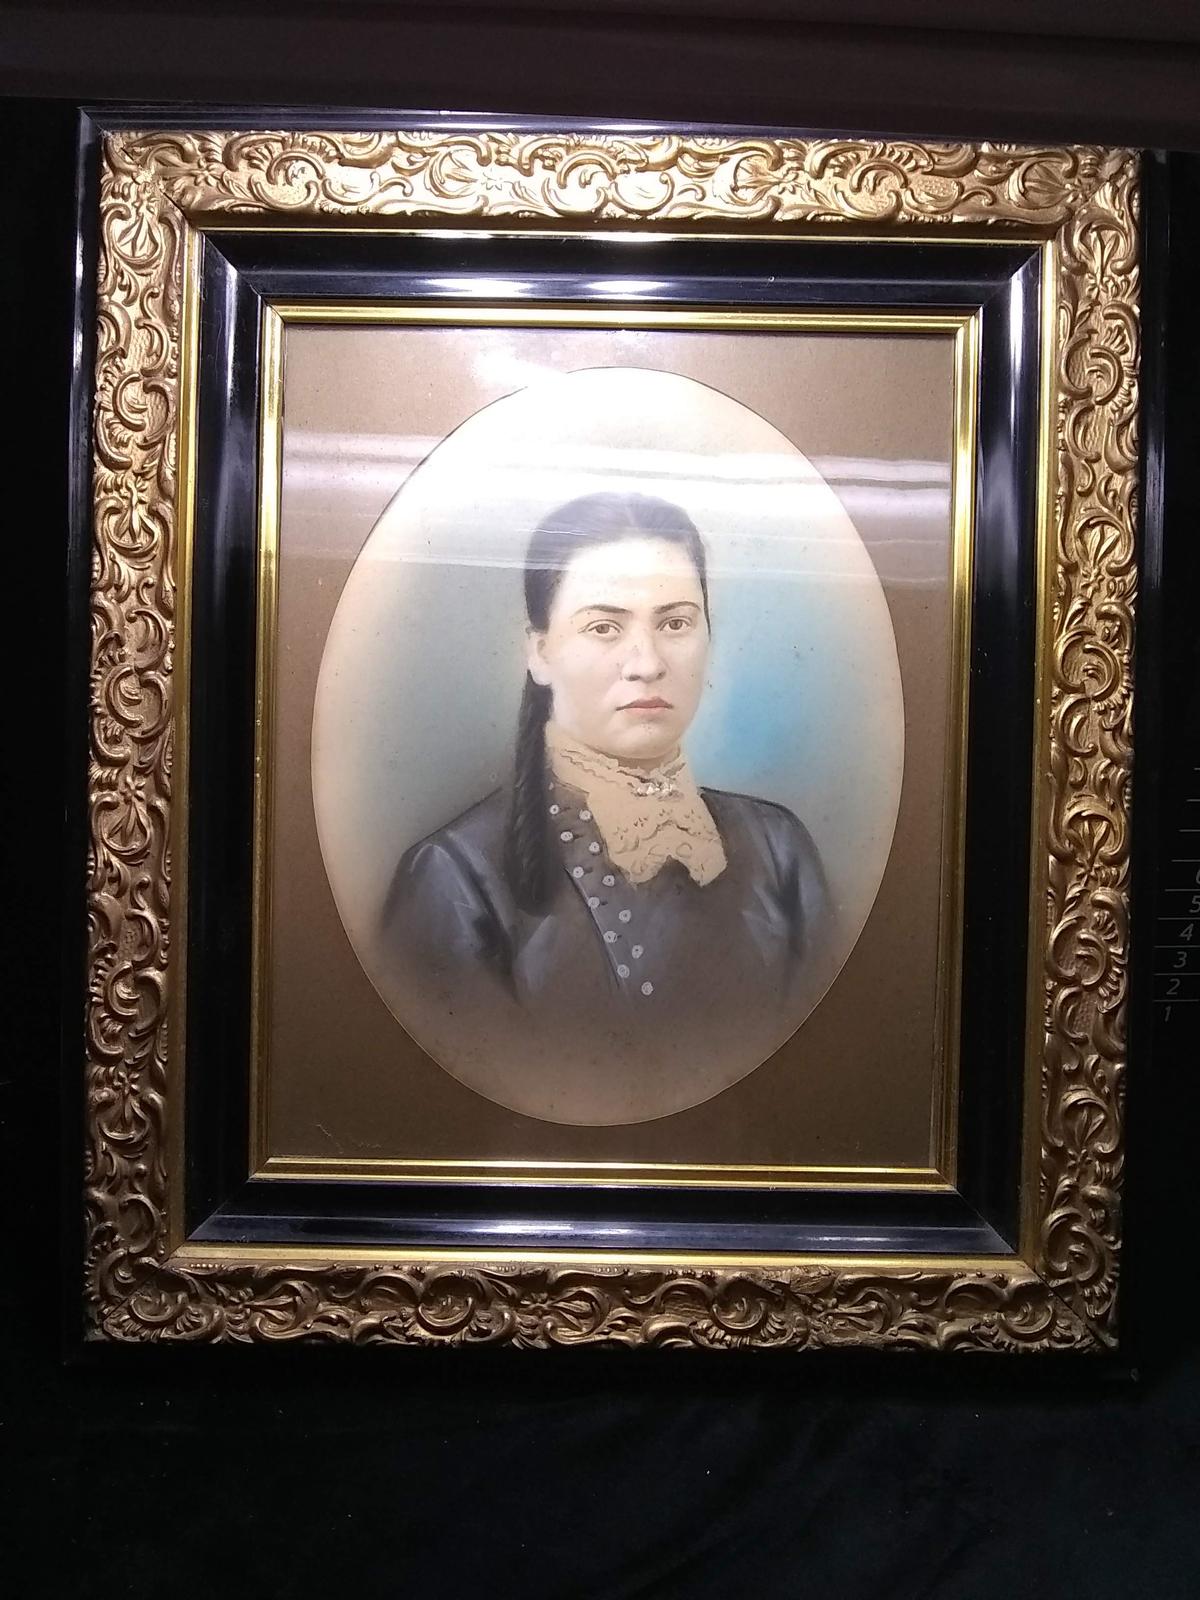 Vintage Colorized Portrait of Lady in Gold Gilded Frame